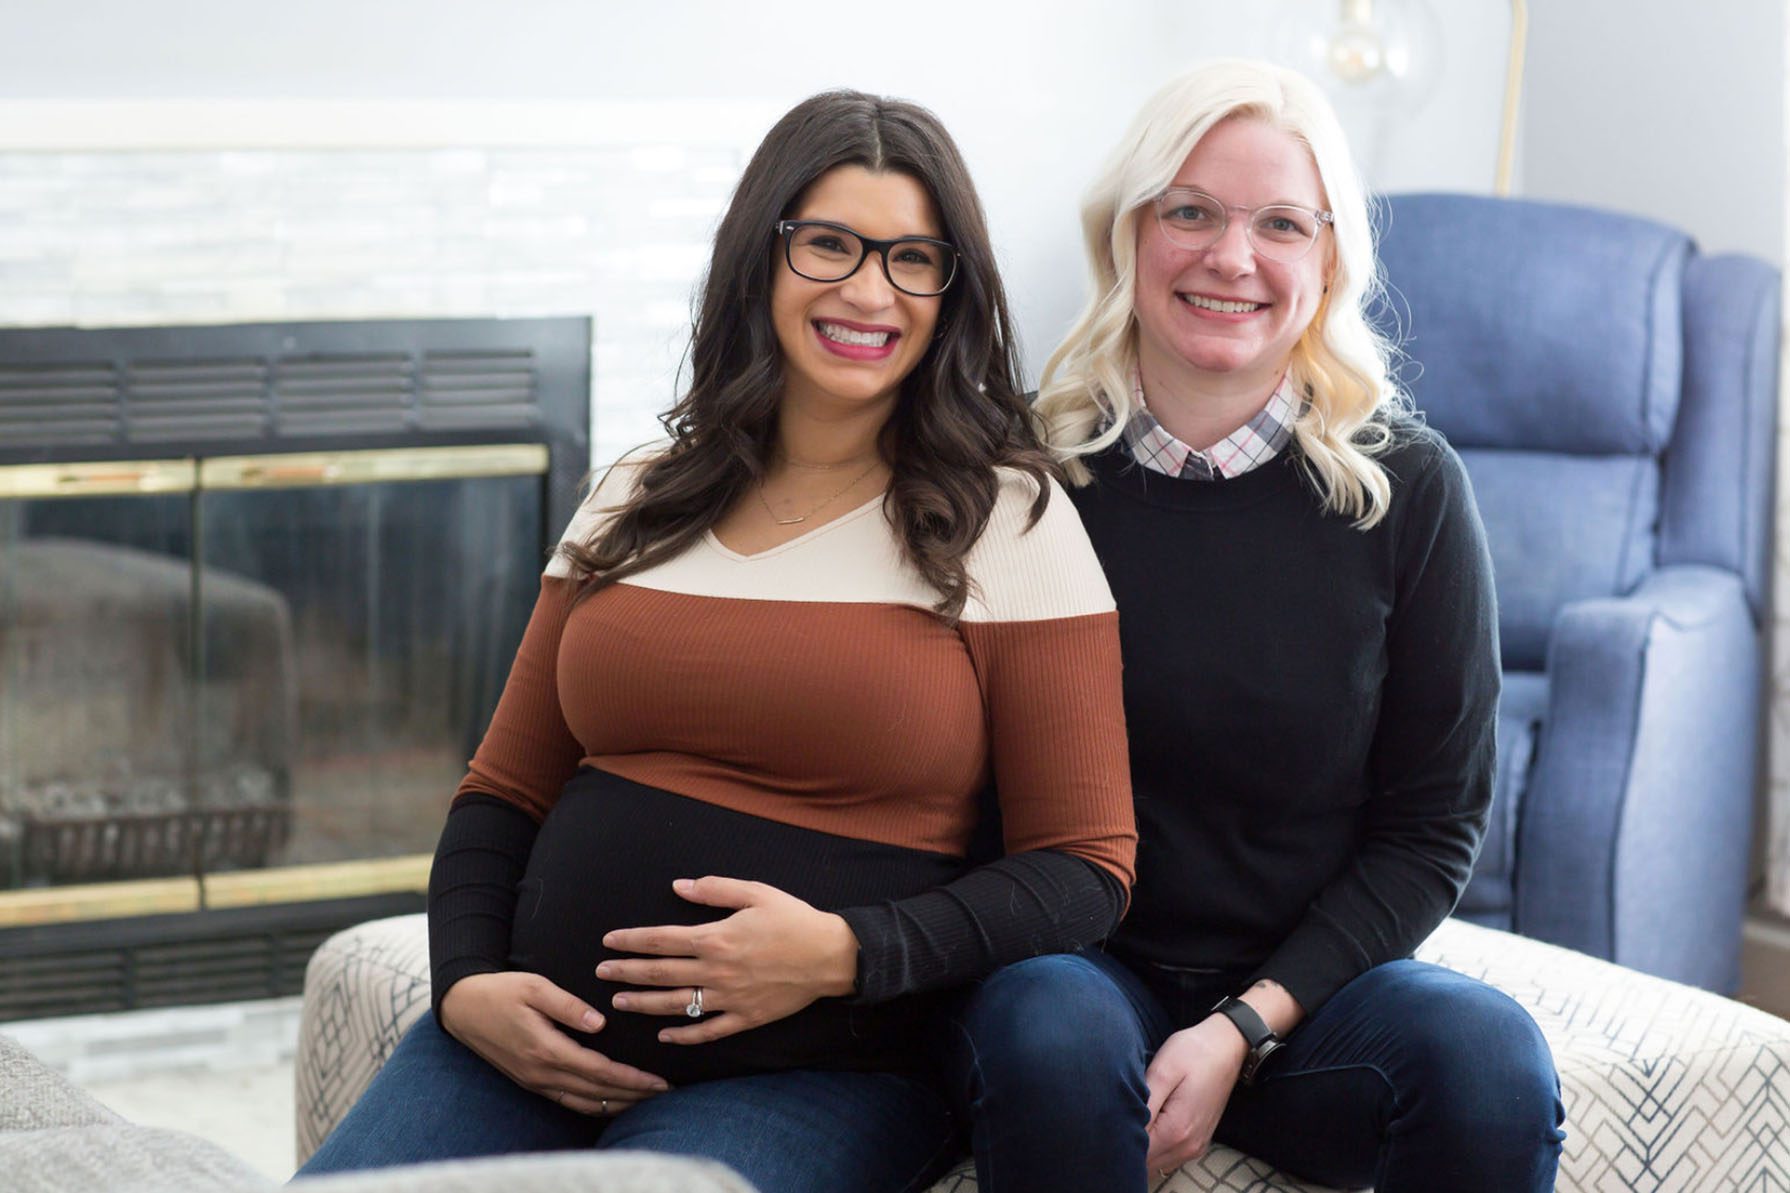 A pregnant Erin Maye Quade poses for a portait with her wife Alyse Maye Quade.